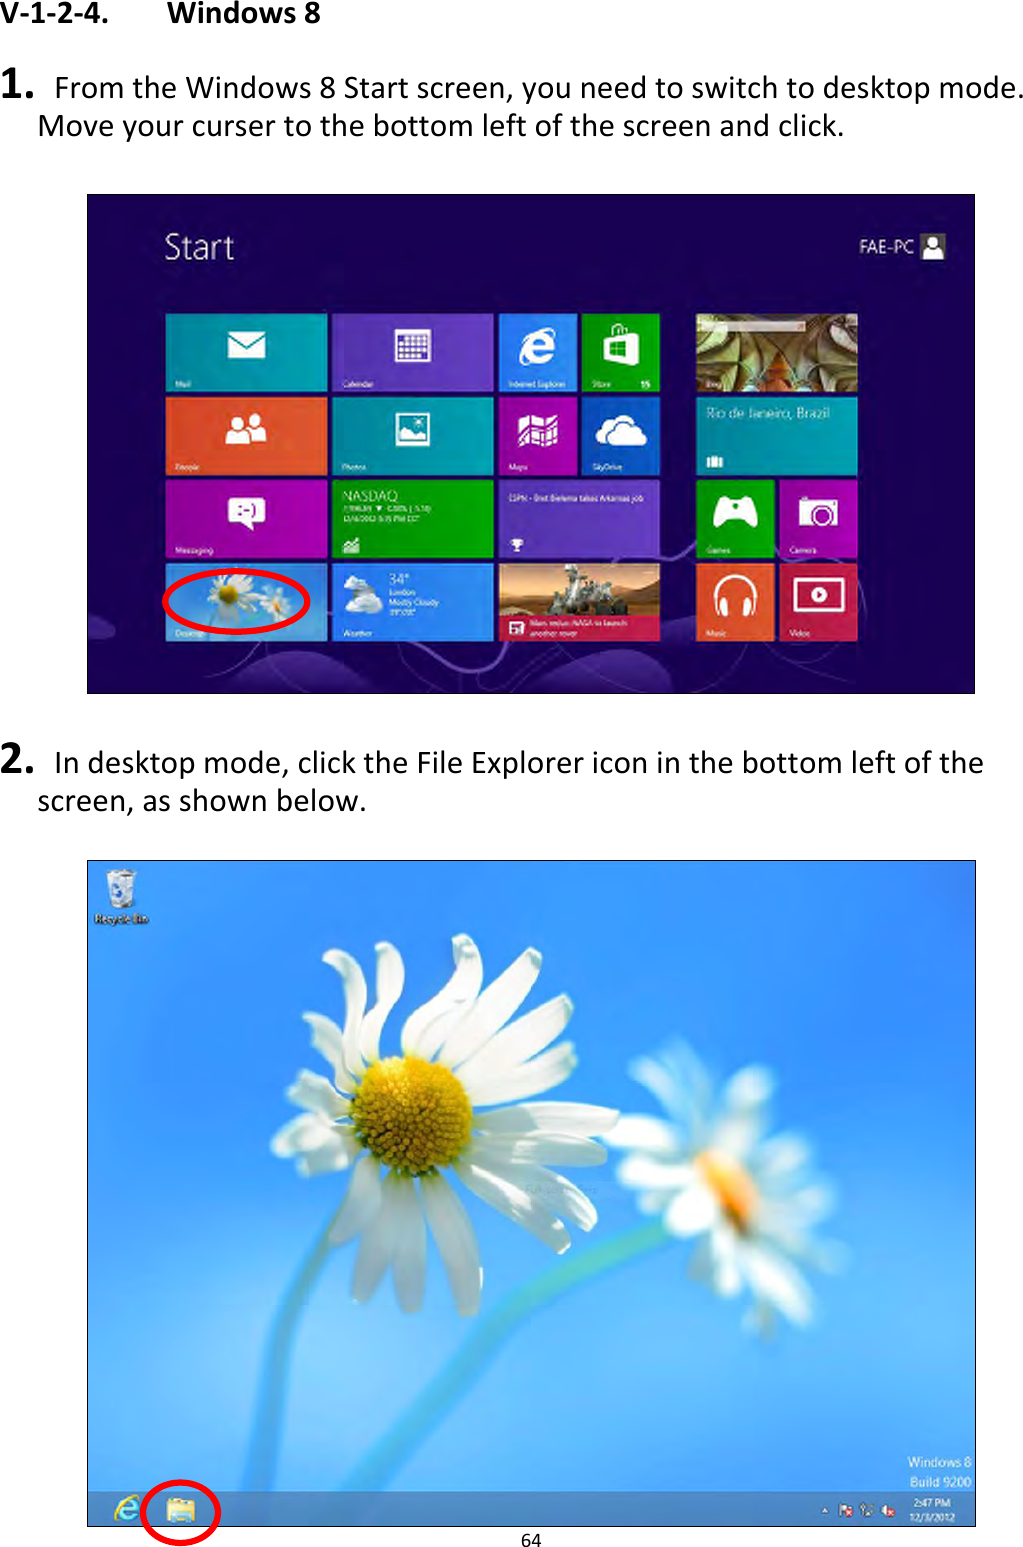 64  V-1-2-4.    Windows 8  1.   From the Windows 8 Start screen, you need to switch to desktop mode. Move your curser to the bottom left of the screen and click.    2.   In desktop mode, click the File Explorer icon in the bottom left of the screen, as shown below.   